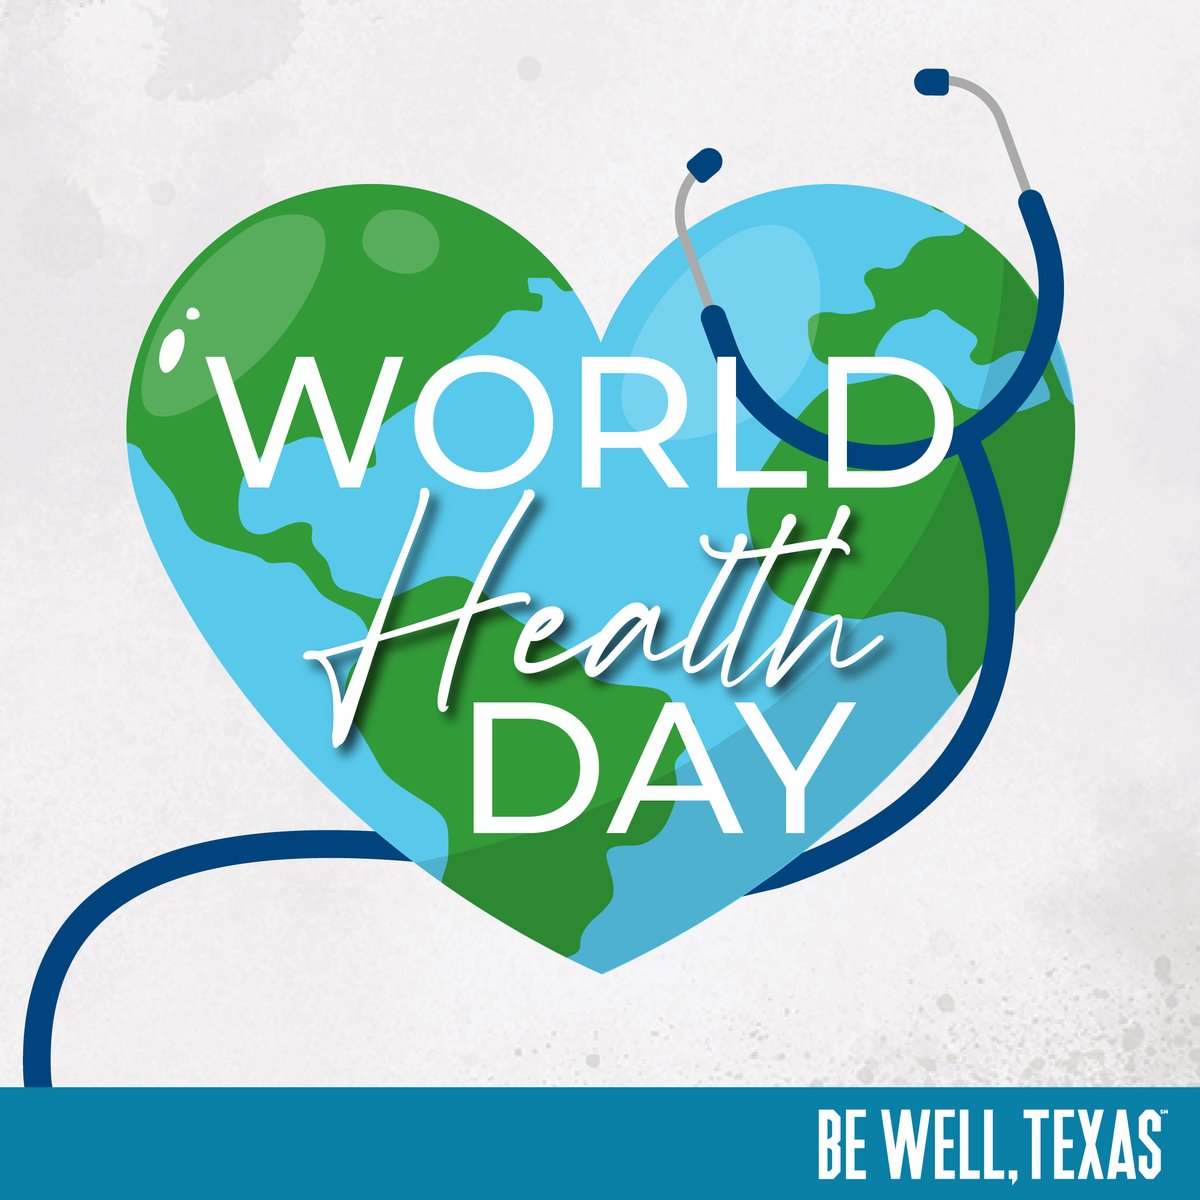 Happy #WorldHealthDay! 💙🌎 At Be Well Texas, we believe high-quality care should be easily accessible and offered to all who need it. If you would like to learn more about Be Well Texas’ mission and values, please visit bewelltexas.org.